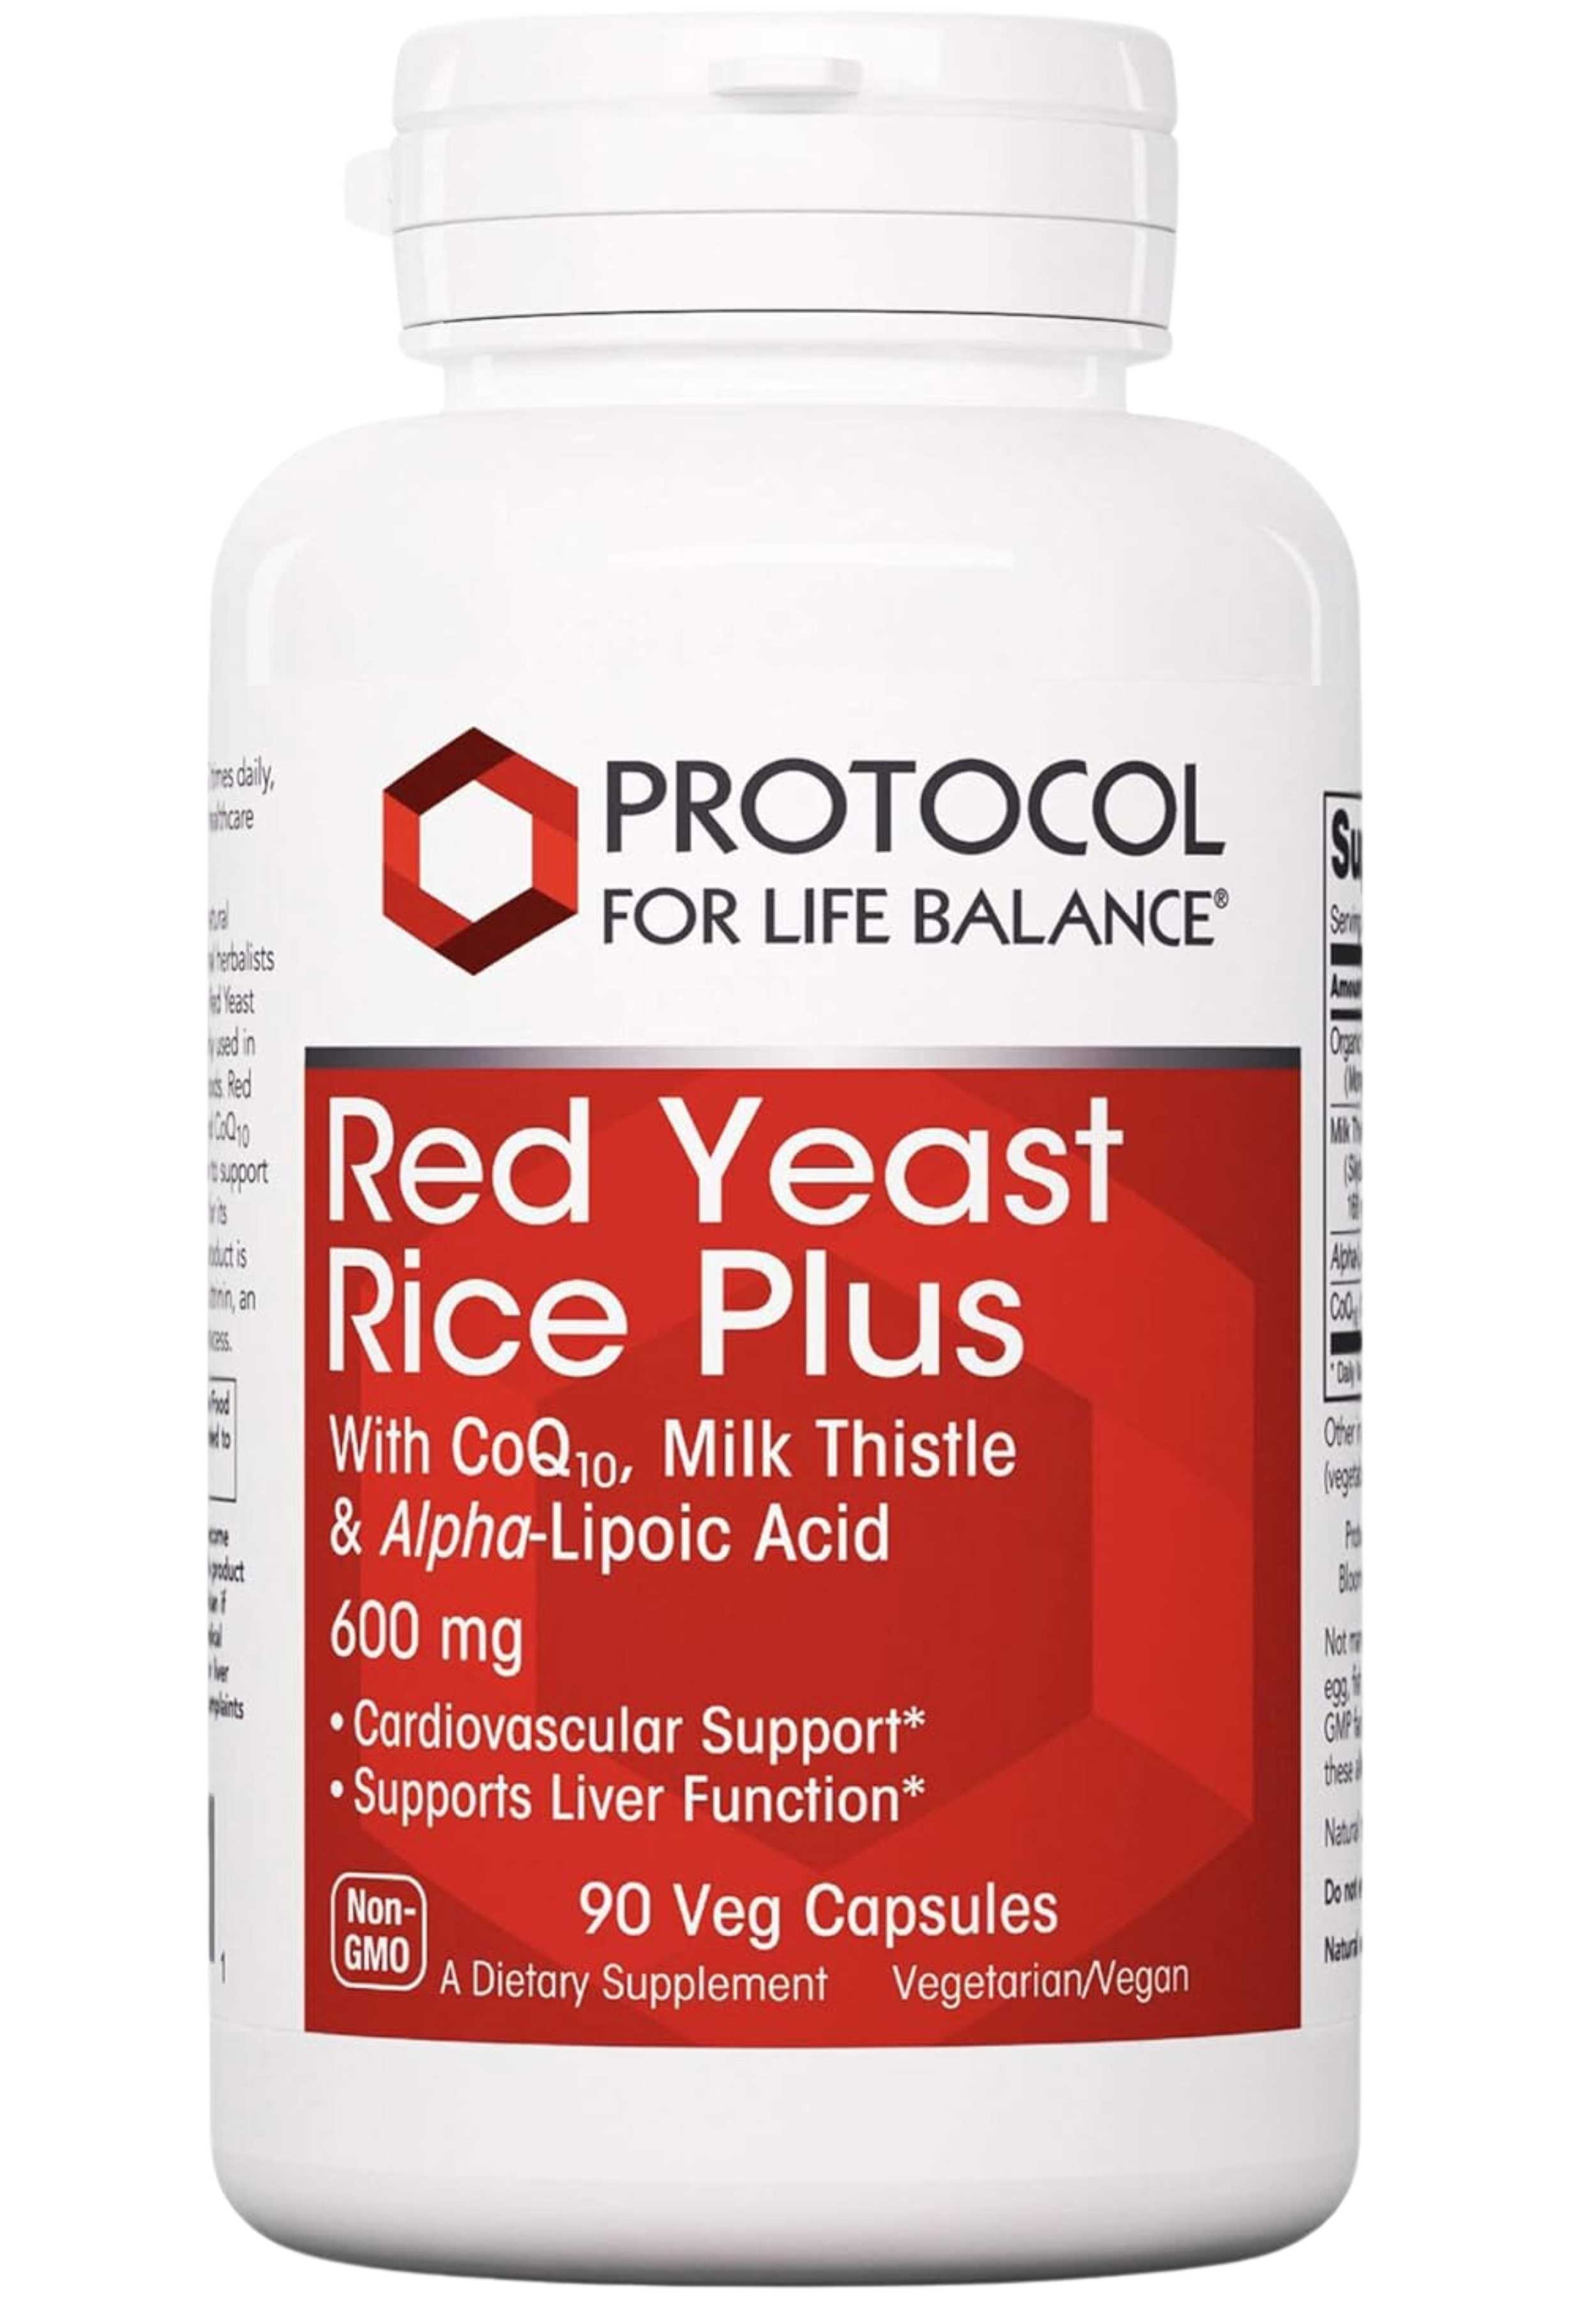 Protocol for Life Balance Red Yeast Rice Plus